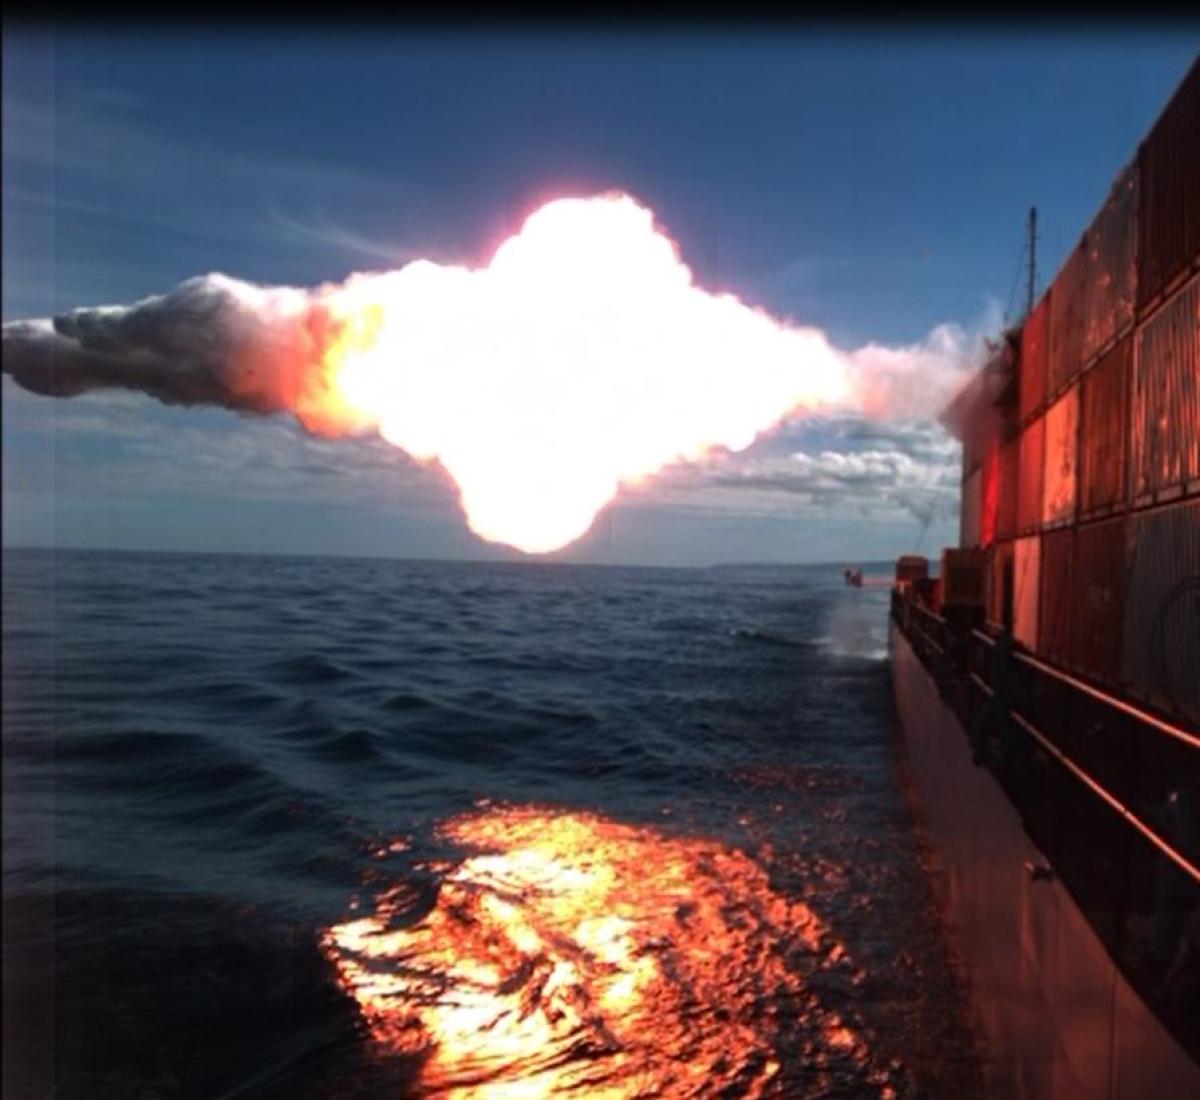 A Tomahawk cruise missile hits a moving maritime target